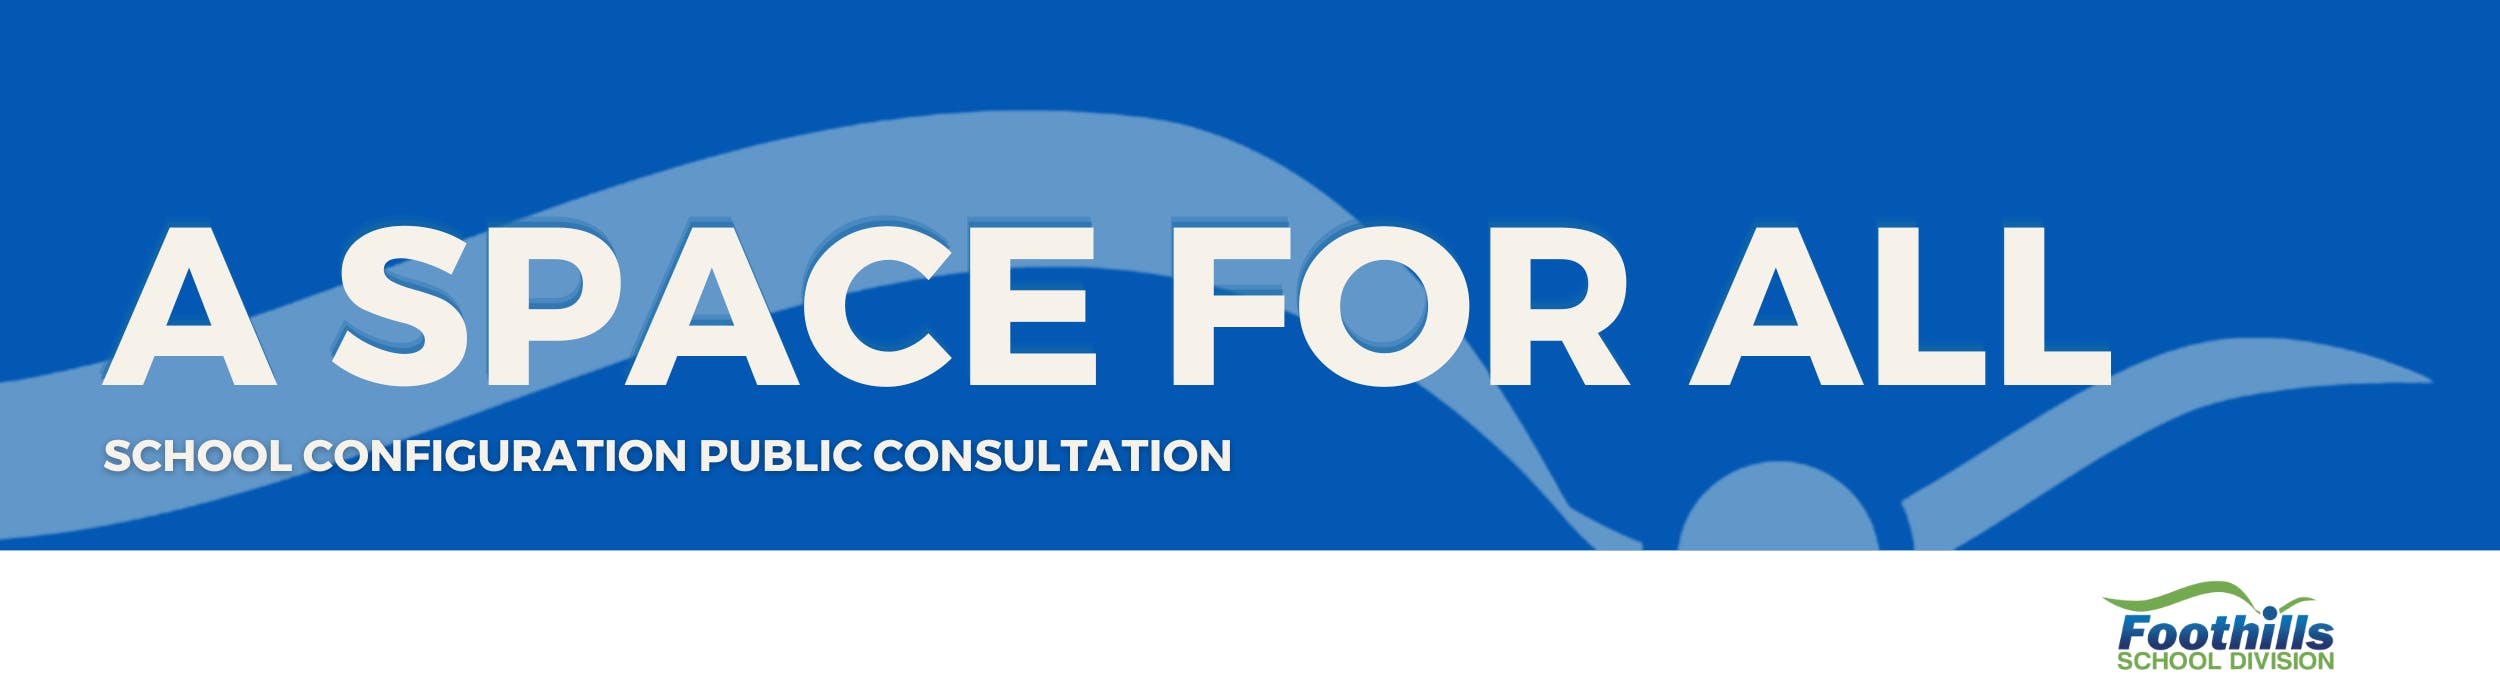 Text: A Space for All. School configuration public consultation. Foothills School Division Logo